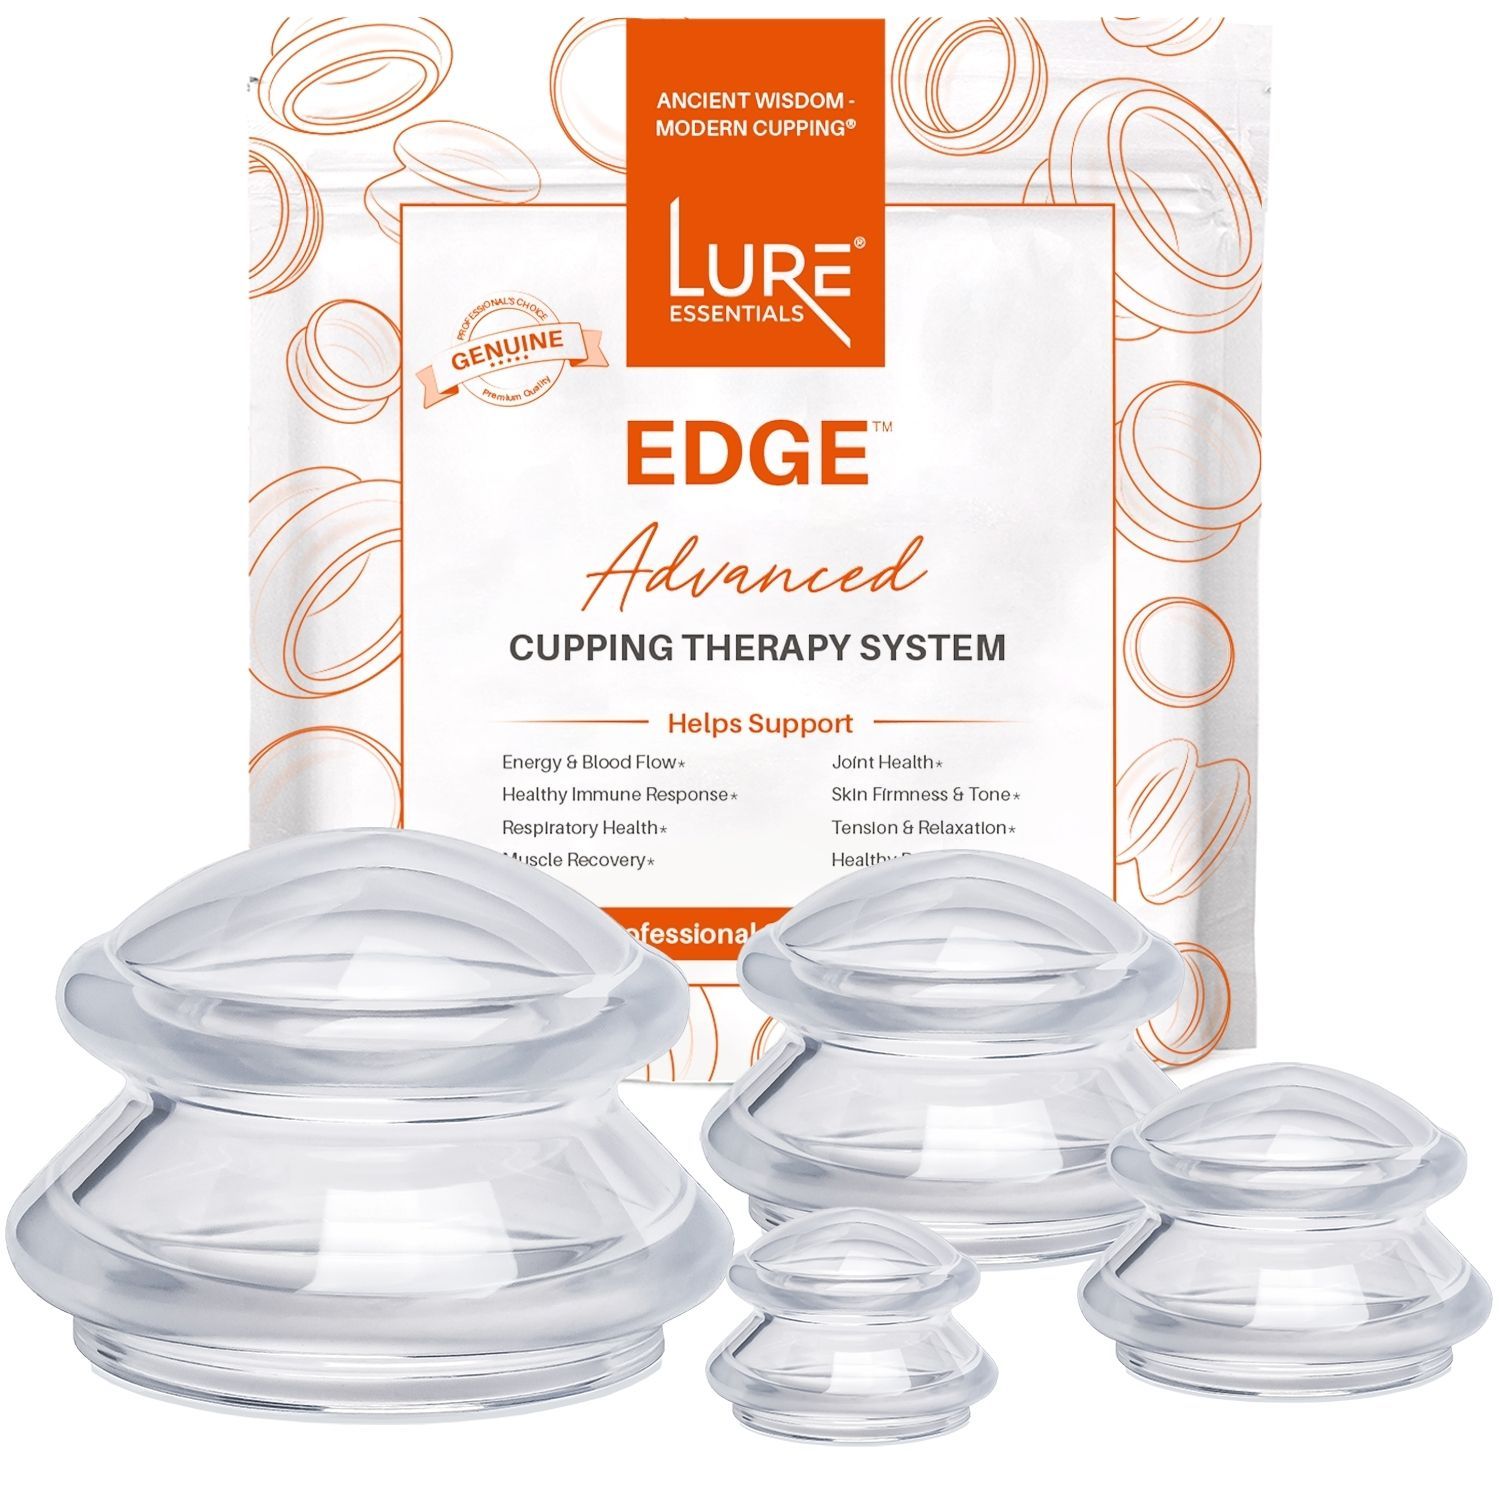 LURE Essentials Edge Cupping Therapy Set - Cupping Kit for Massage